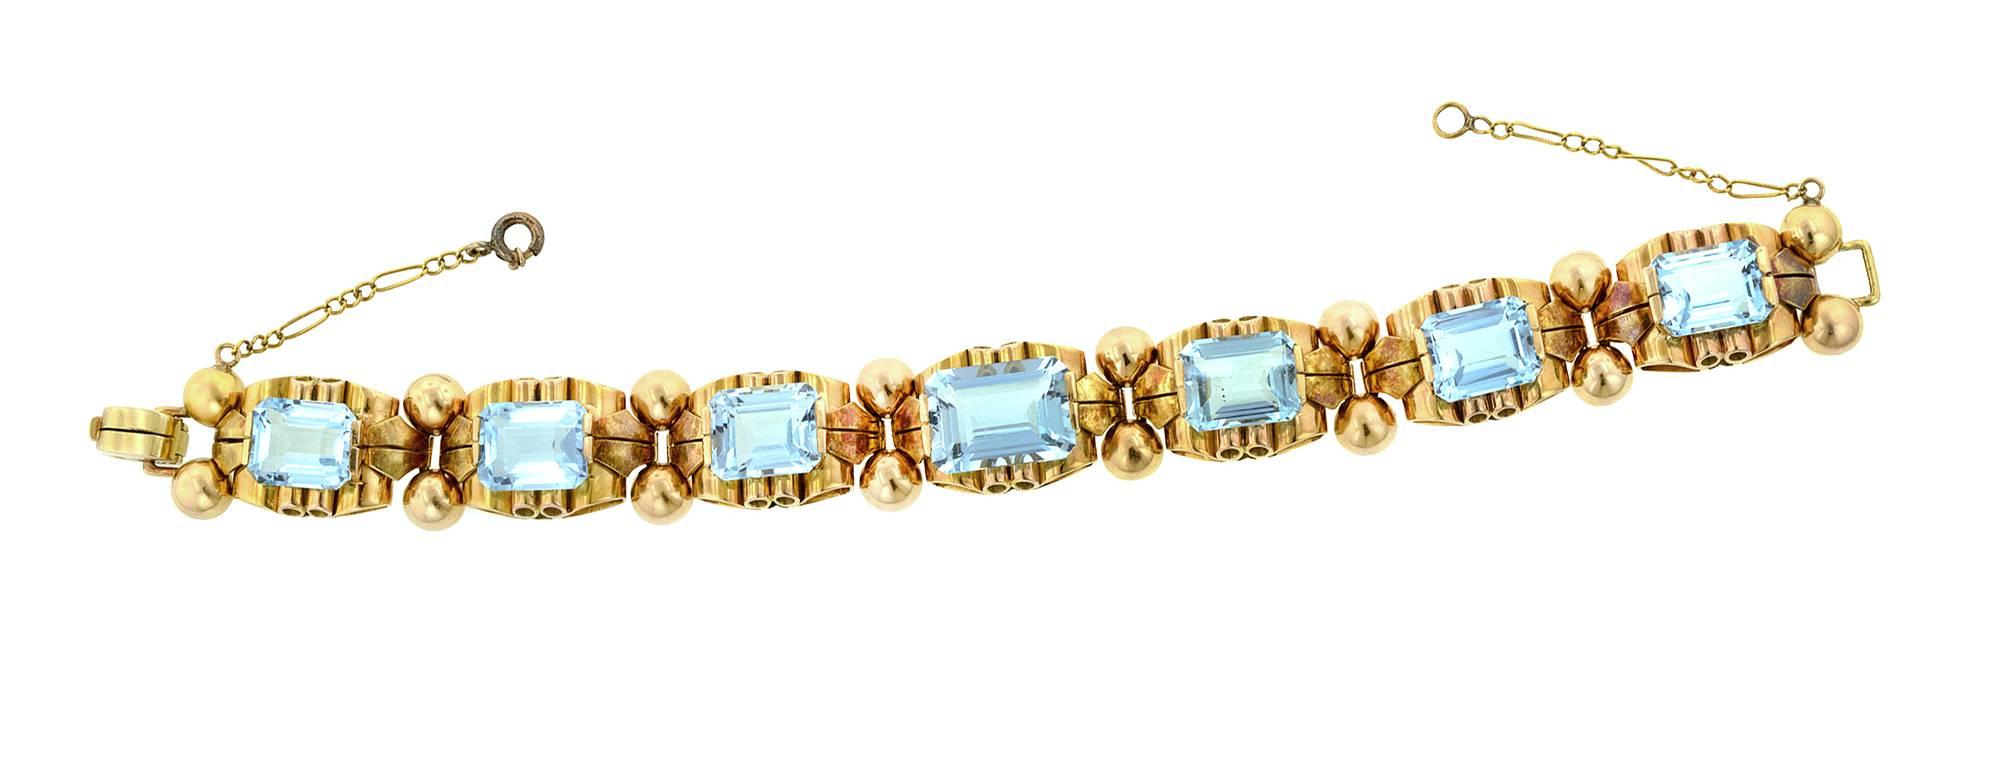 Retro Aquamarine Gold Bracelet In Good Condition For Sale In New York, NY